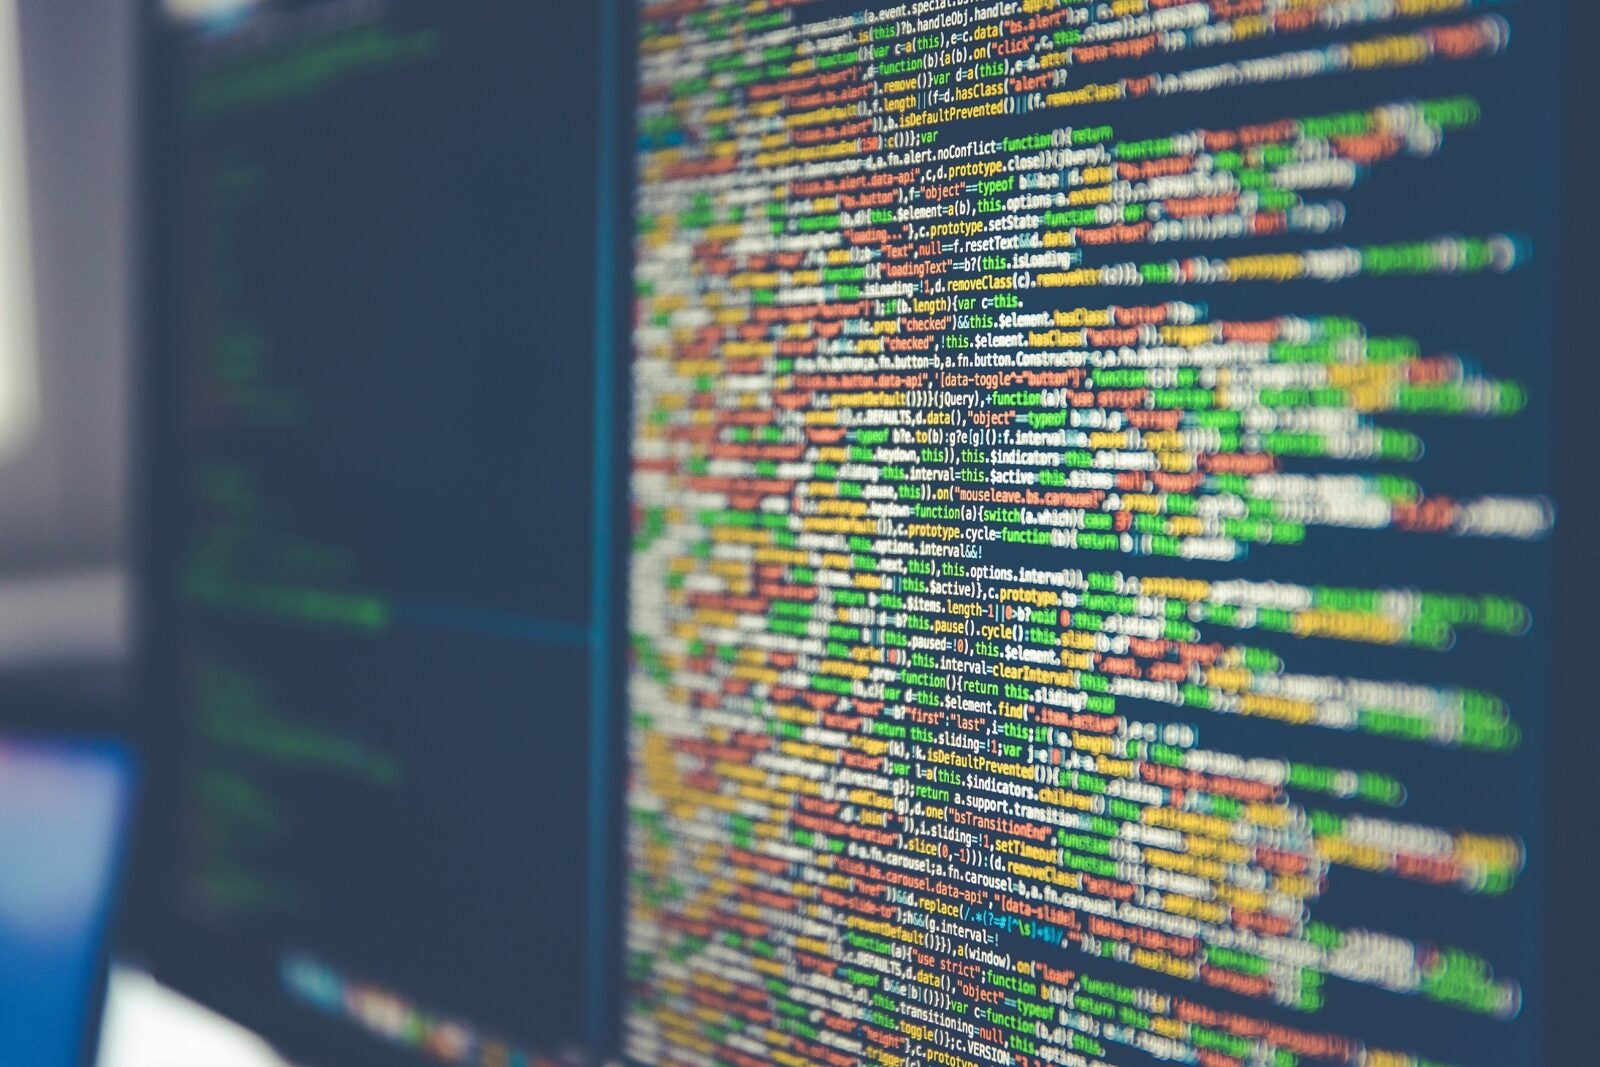 Colorful software or web code on a computer monitor
Photo by Markus Spiske on Unsplash